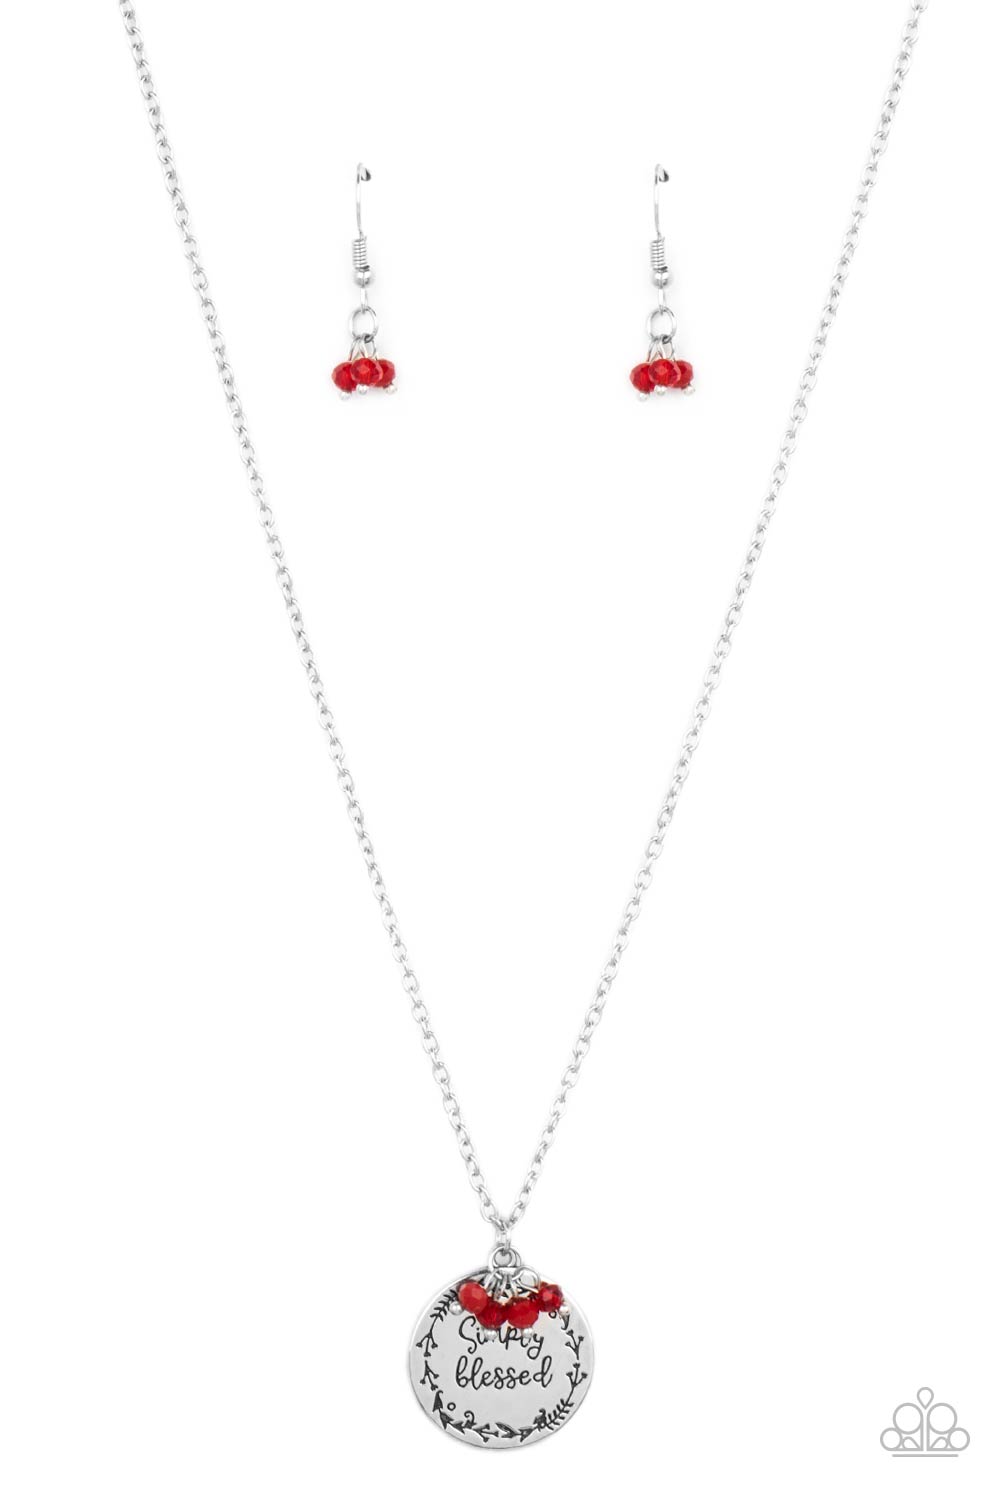 Paparazzi Simple Blessings Inspirational Red Necklace - A Finishing Touch Jewelry